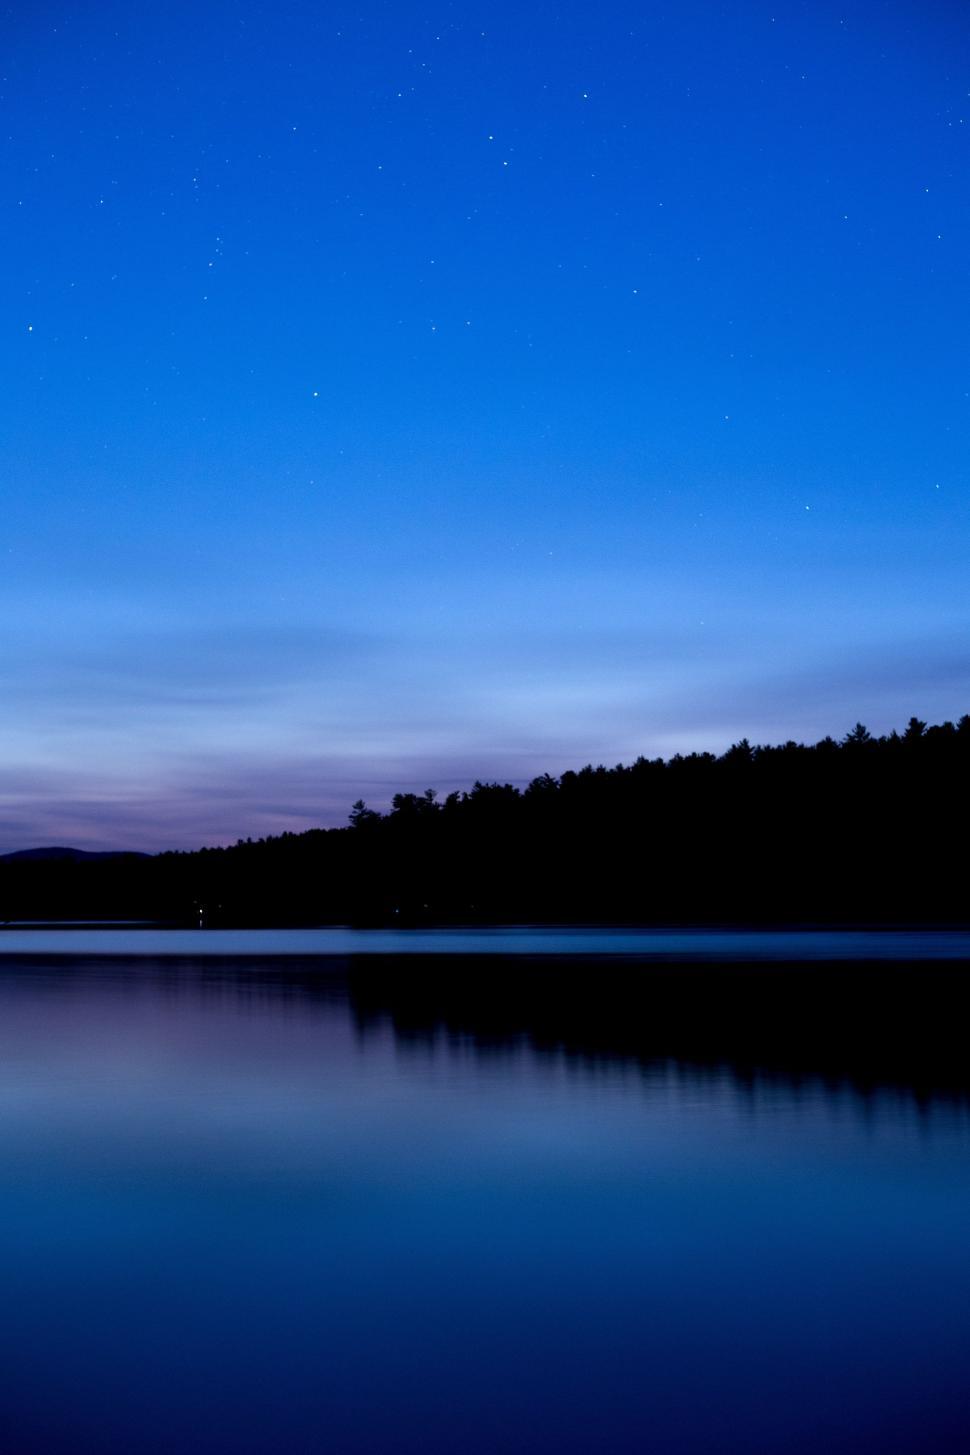 Free Image of Silhouette of trees on blue lake 